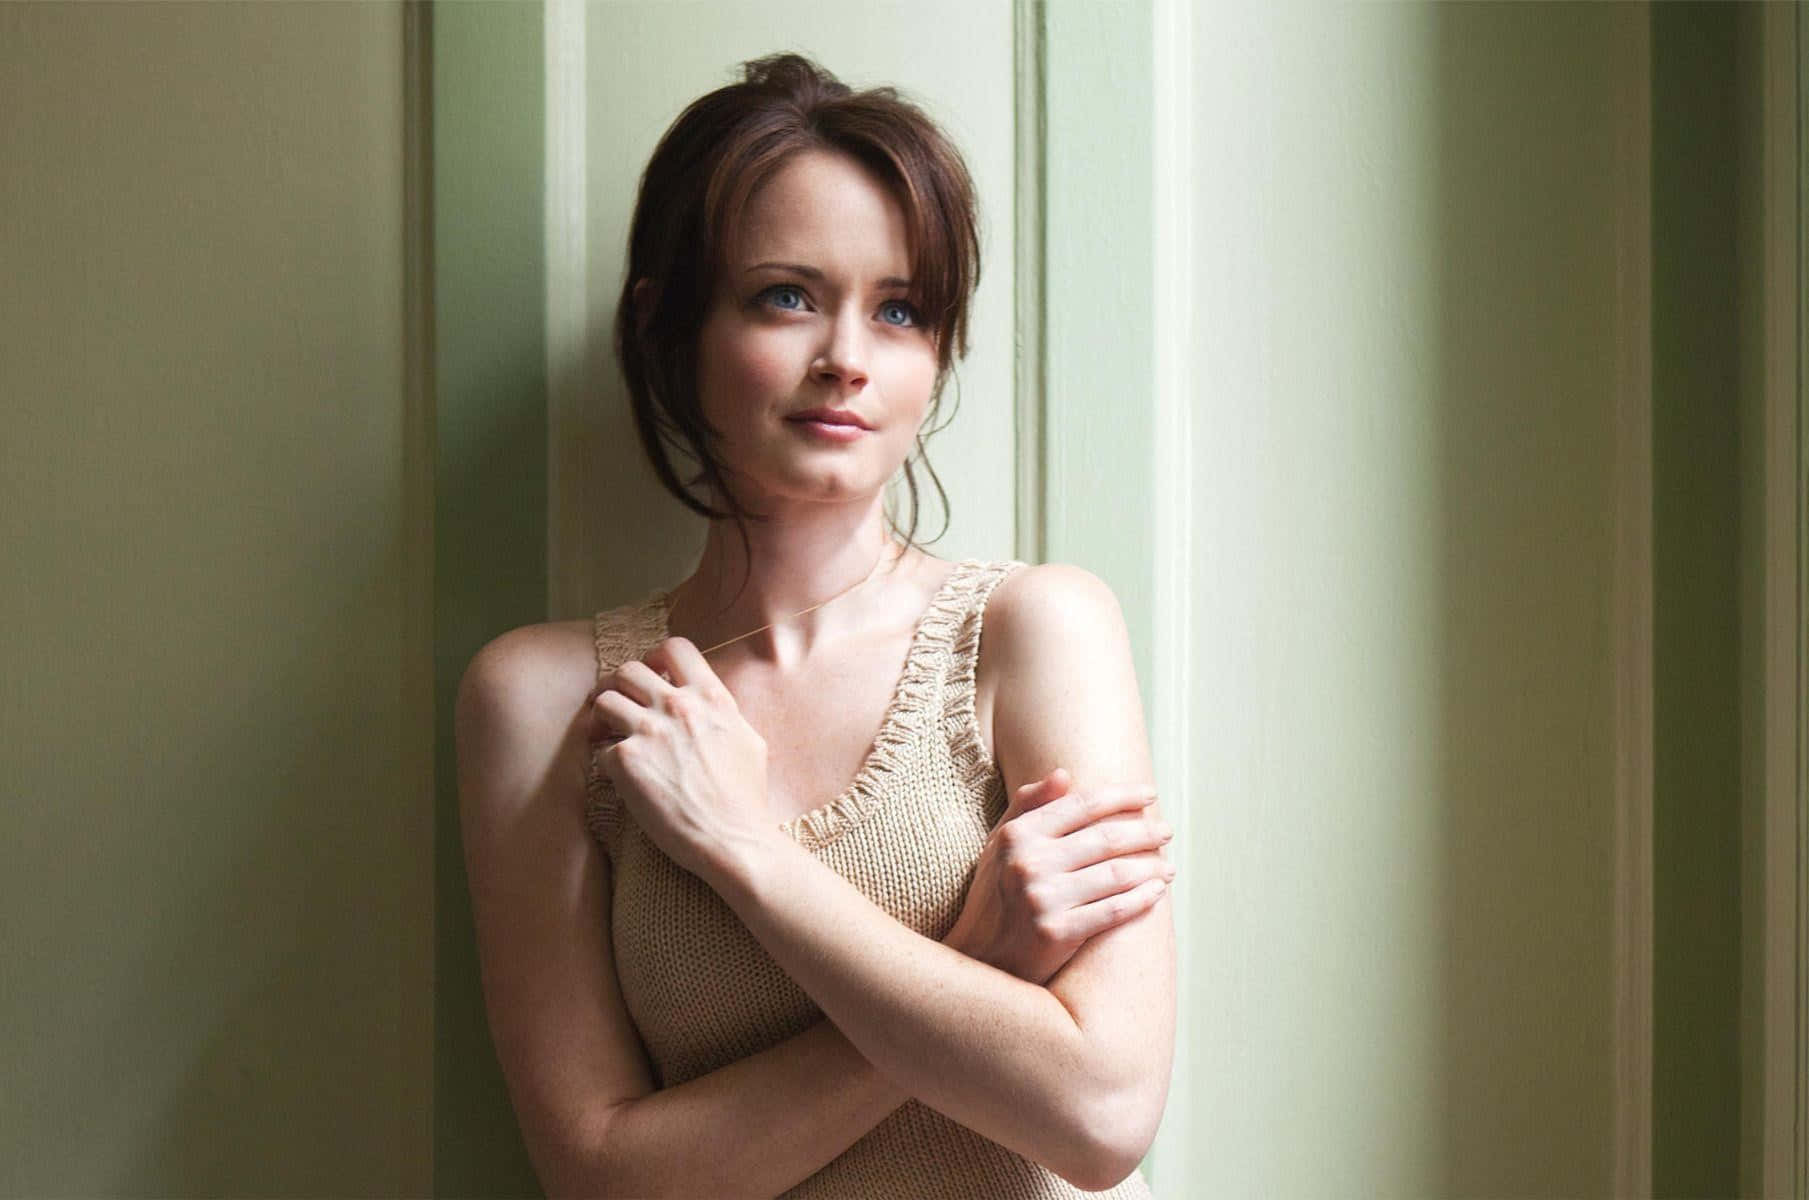 Alexis Bledel striking a pose during a photoshoot. Wallpaper